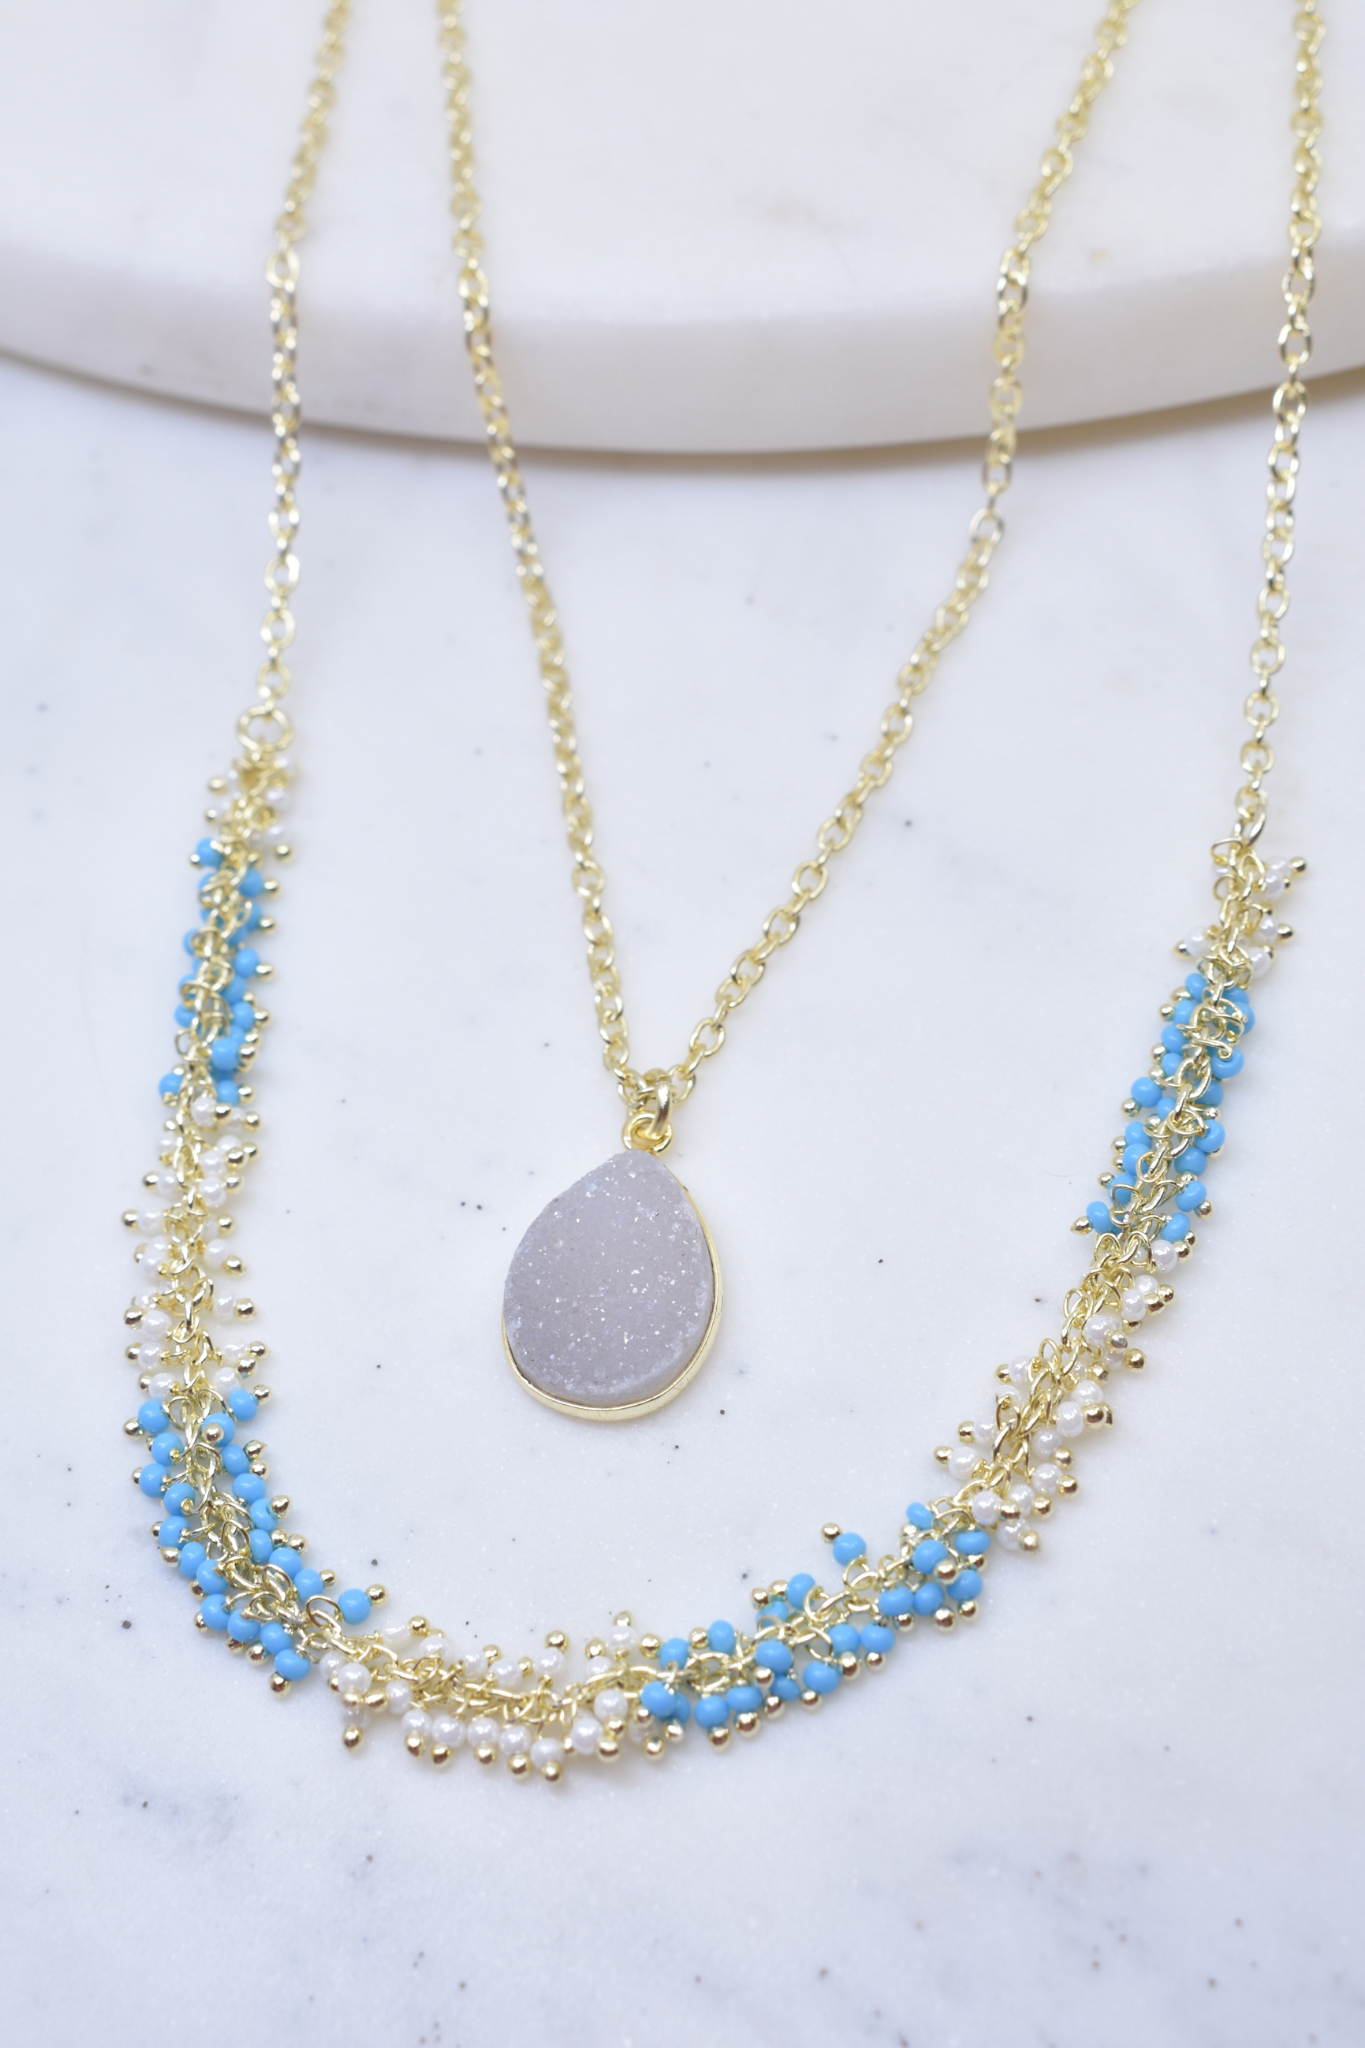 Gold Two-Strand Necklace with Turquoise and Pearl Beads and White Druzy Pendant